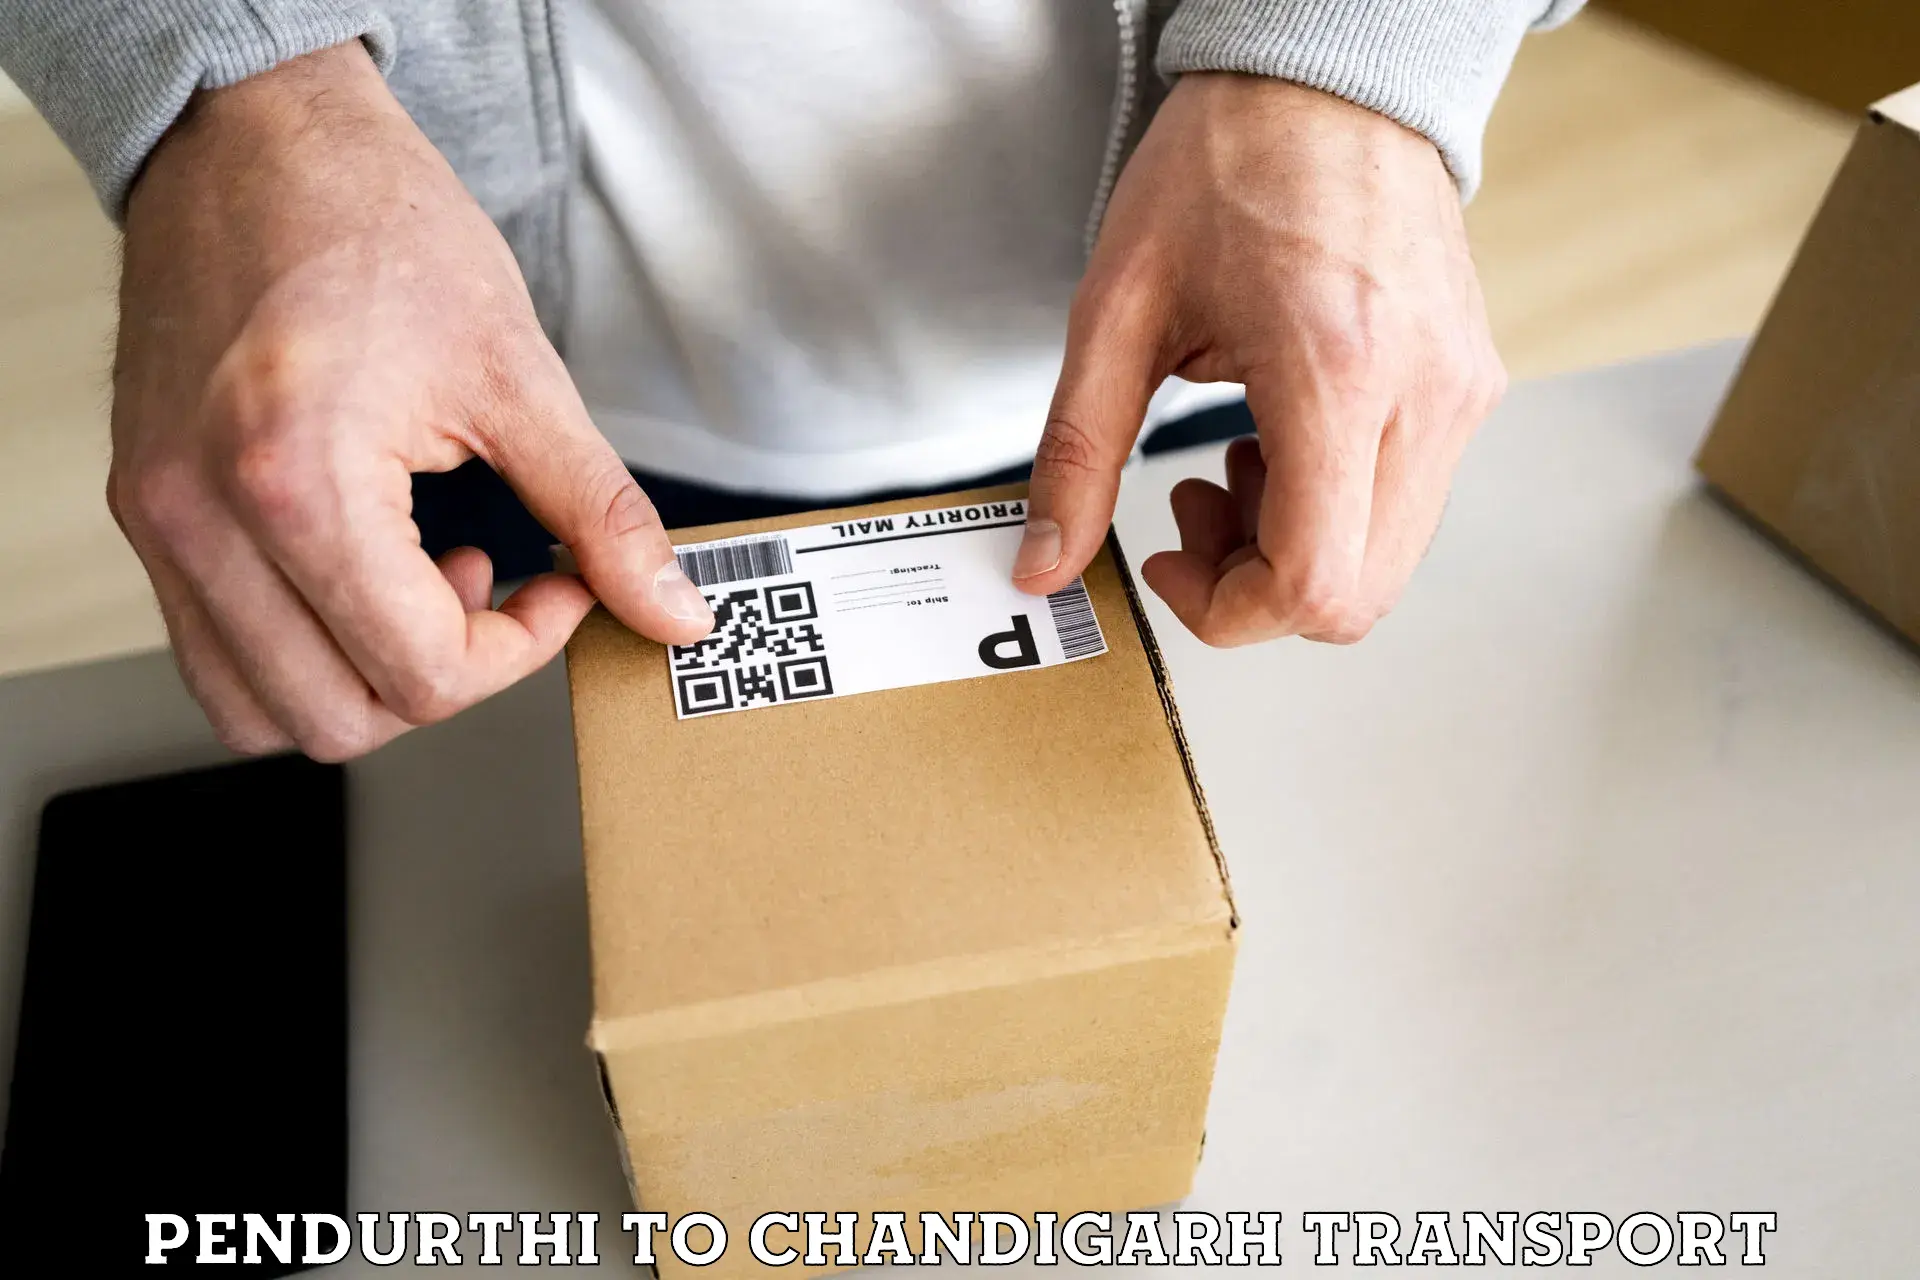 Delivery service Pendurthi to Chandigarh